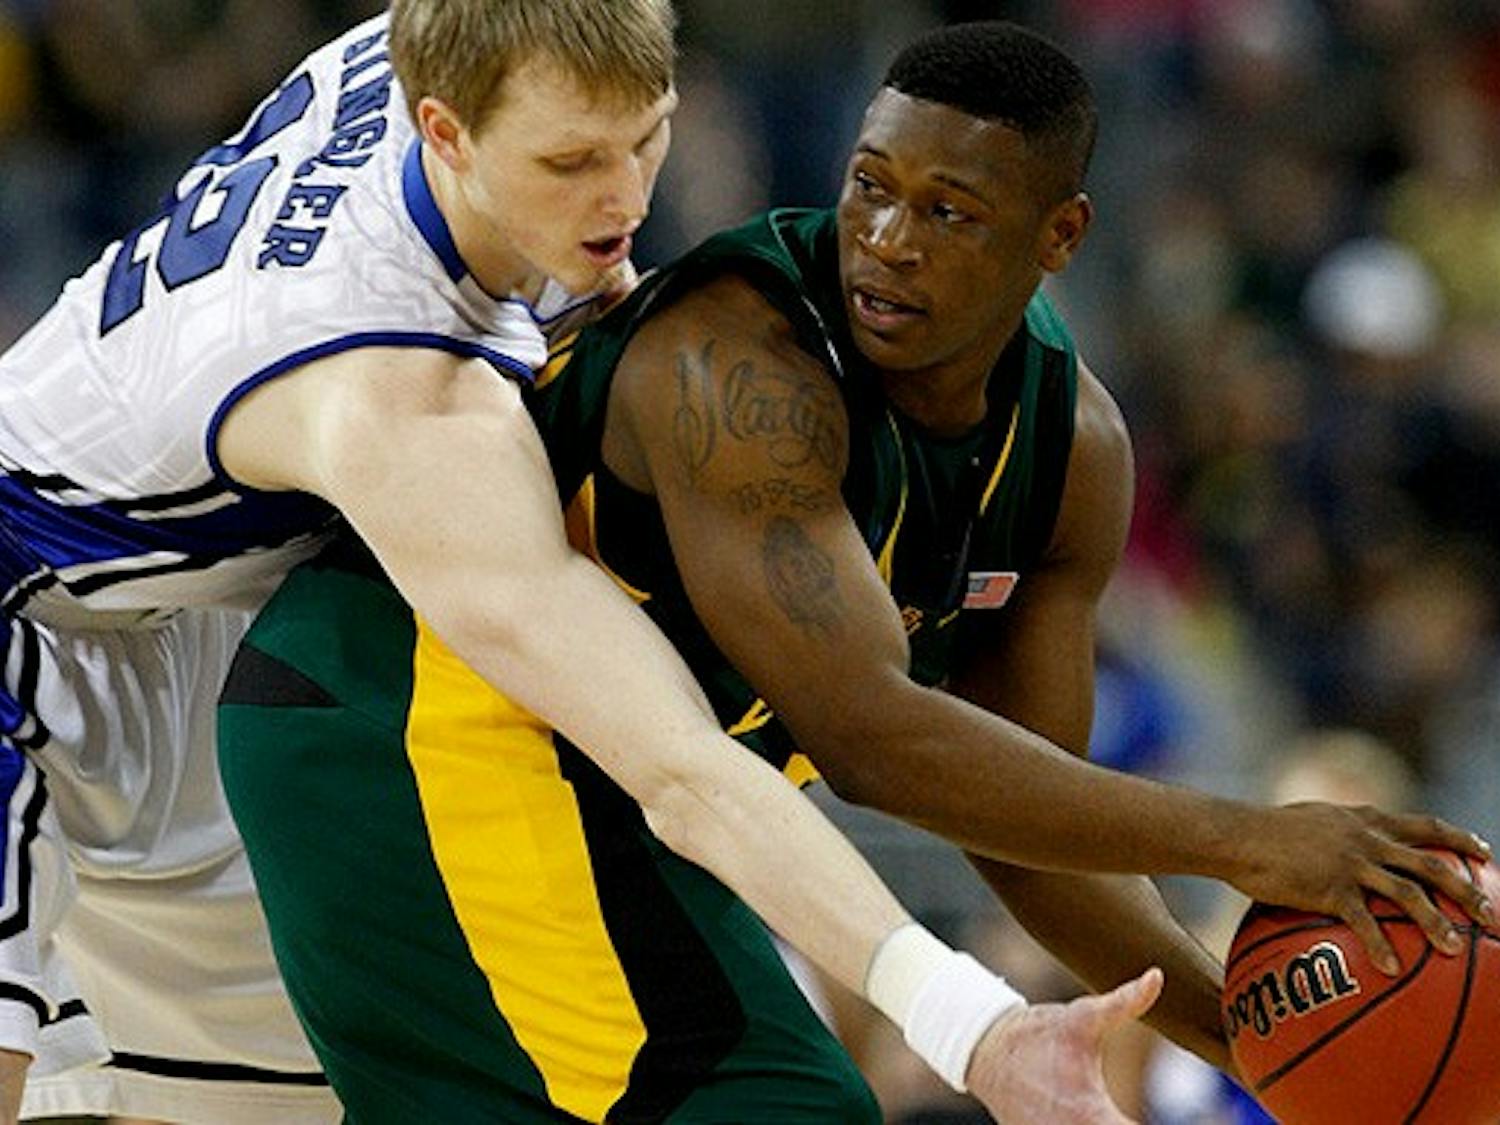 Kyle Singler was assigned to cover quick guards like LaceDarius Dunn and Tweety Carter against Baylor.